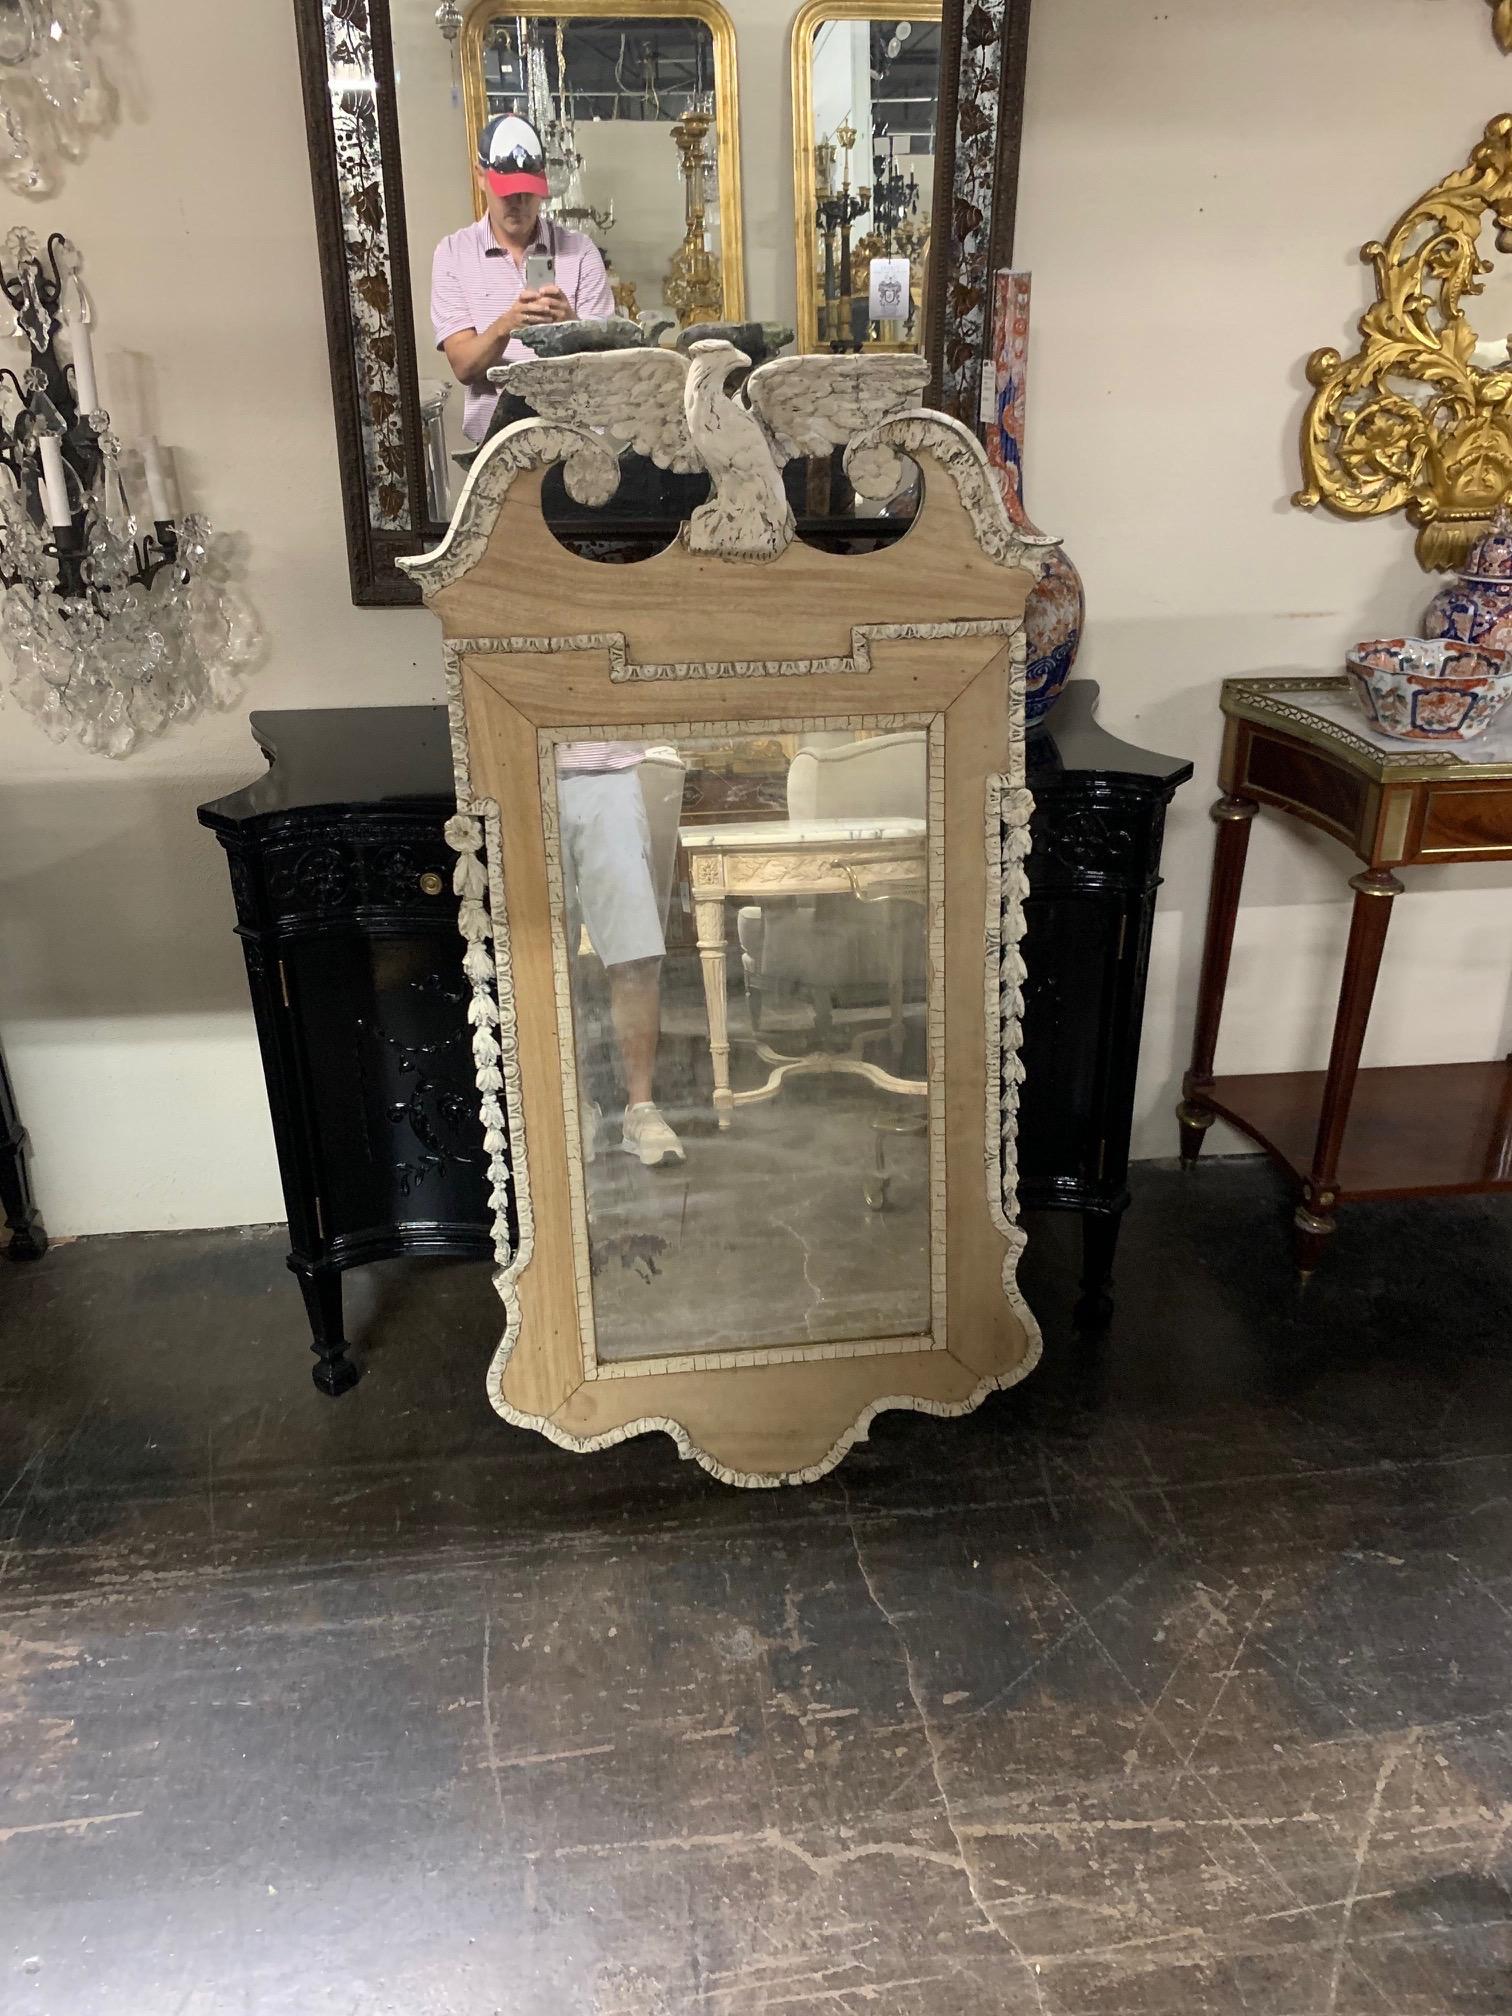 Interesting 19th century English Regency carved and bleached mahogany mirror. Very Fine intricate carving including a bird on top. Very special!